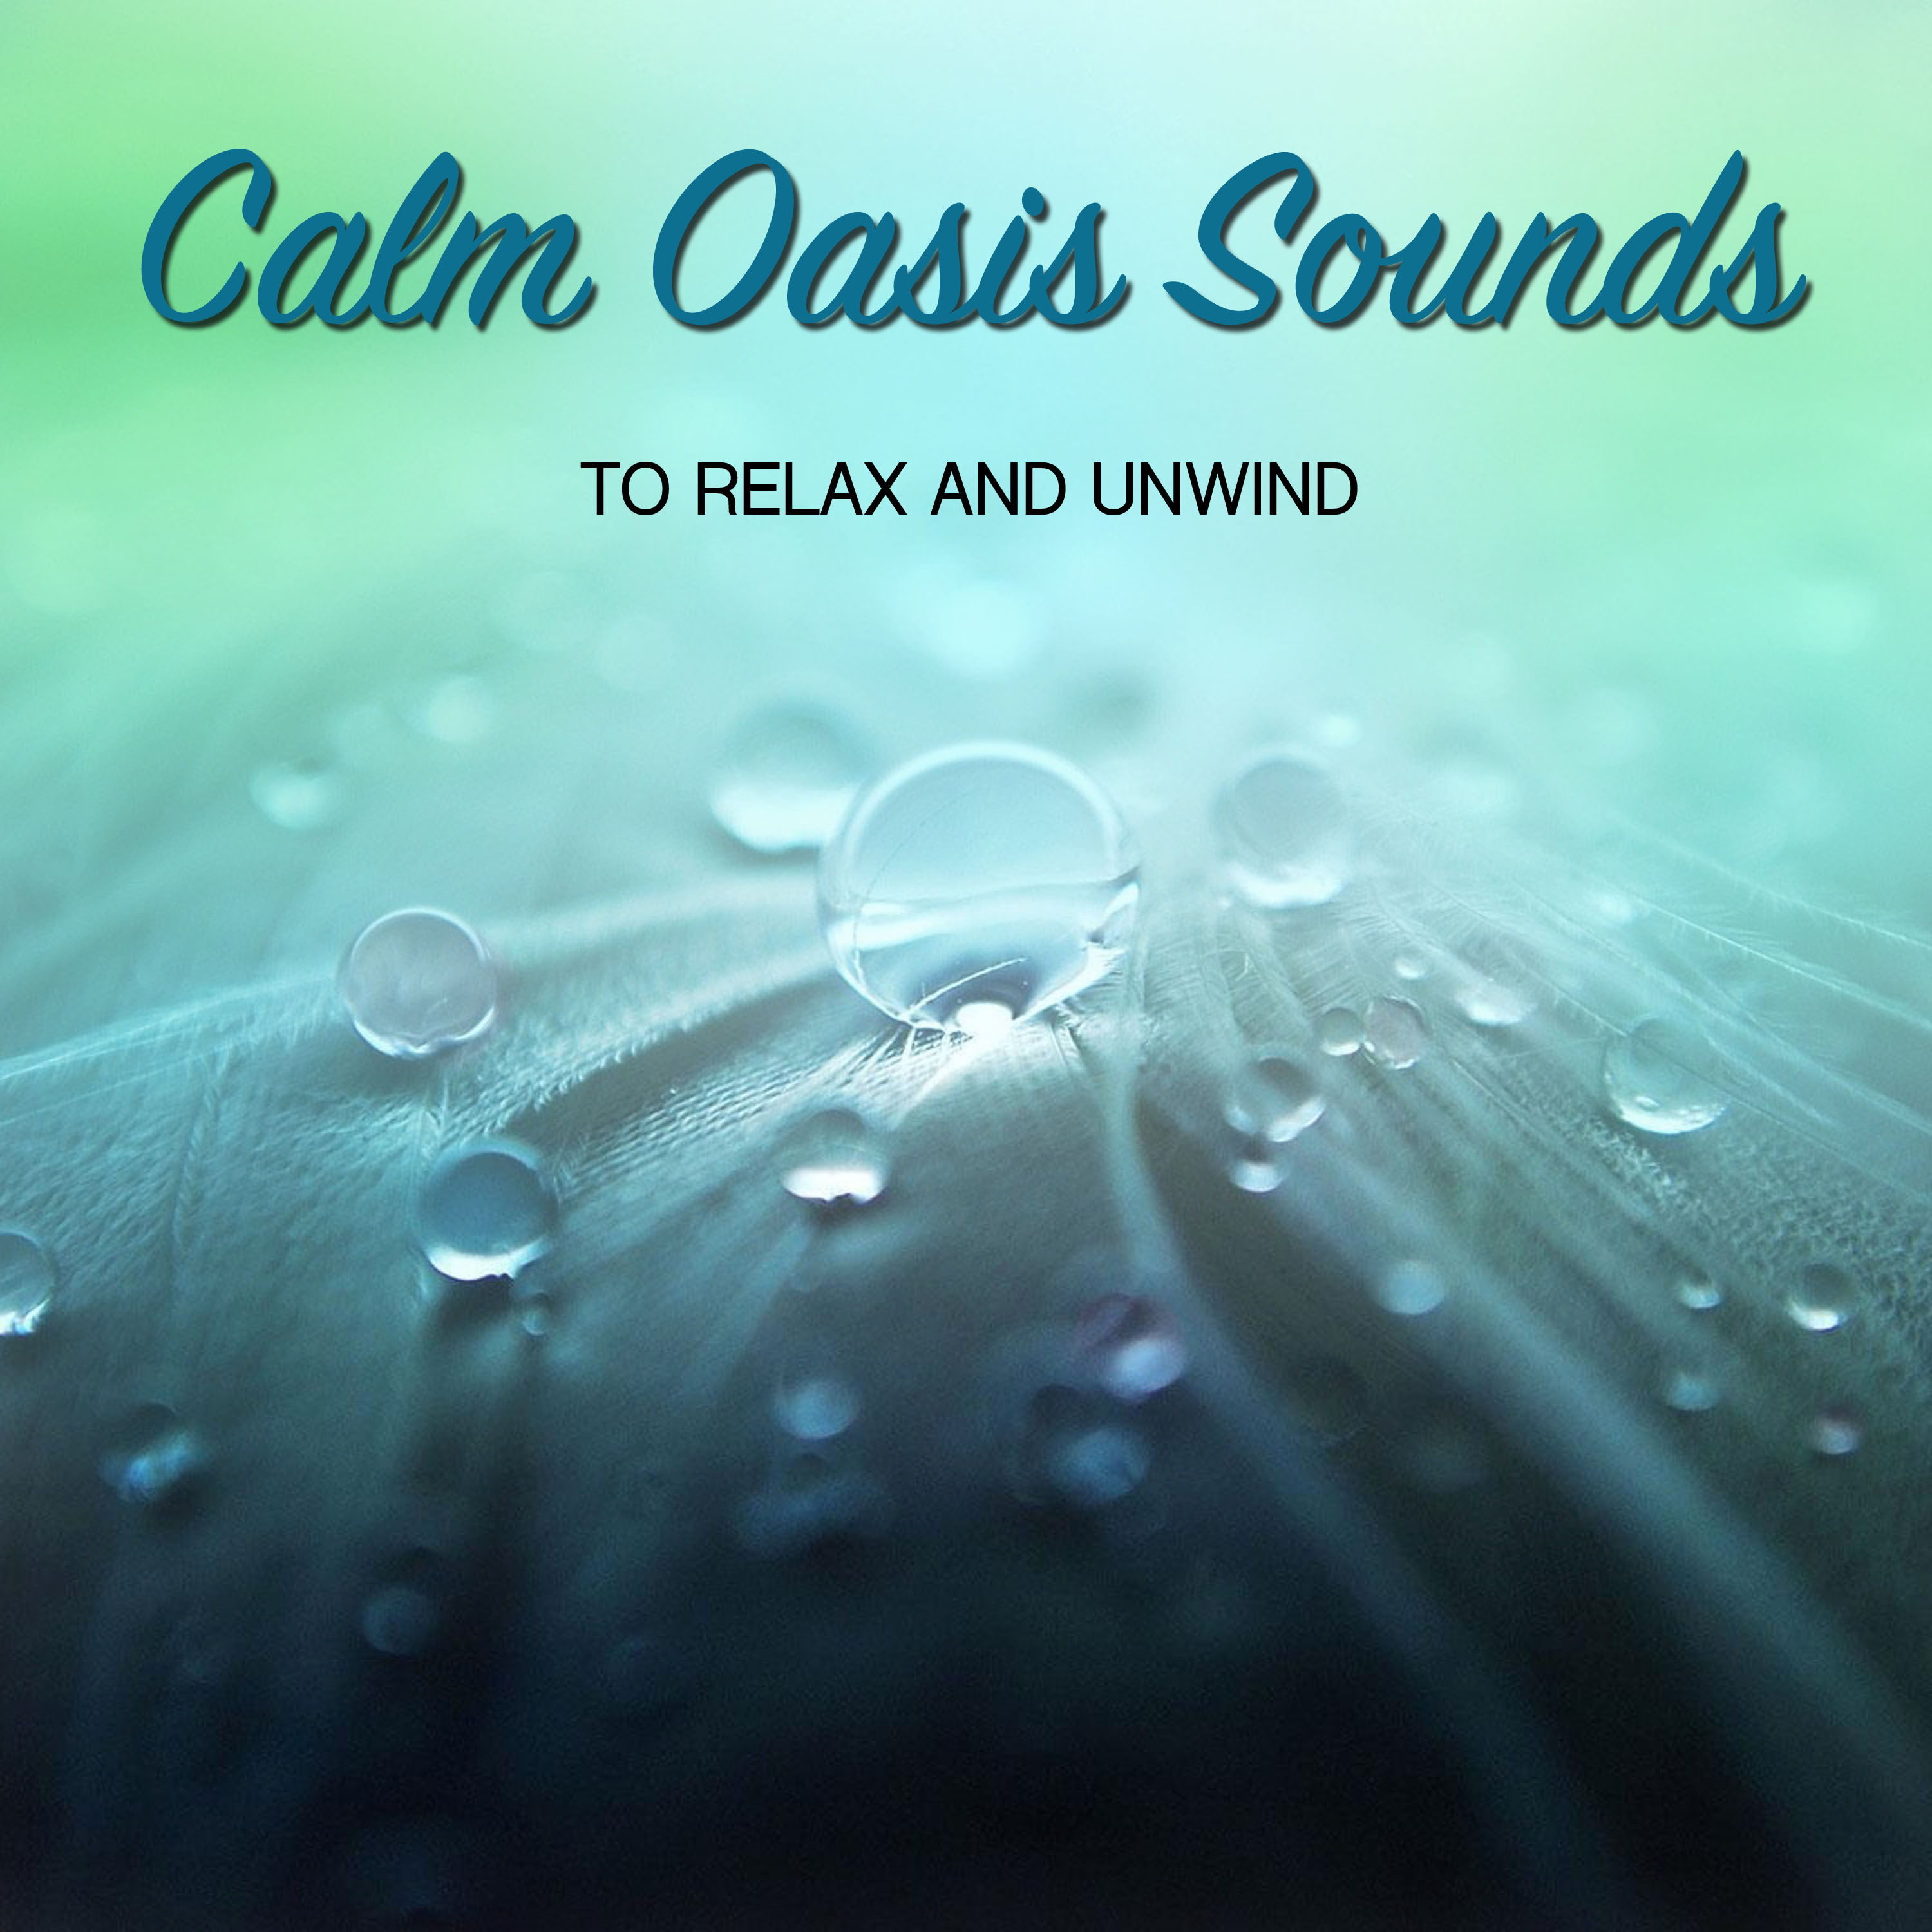 12 Calm Oasis Sounds to Relax and Unwind